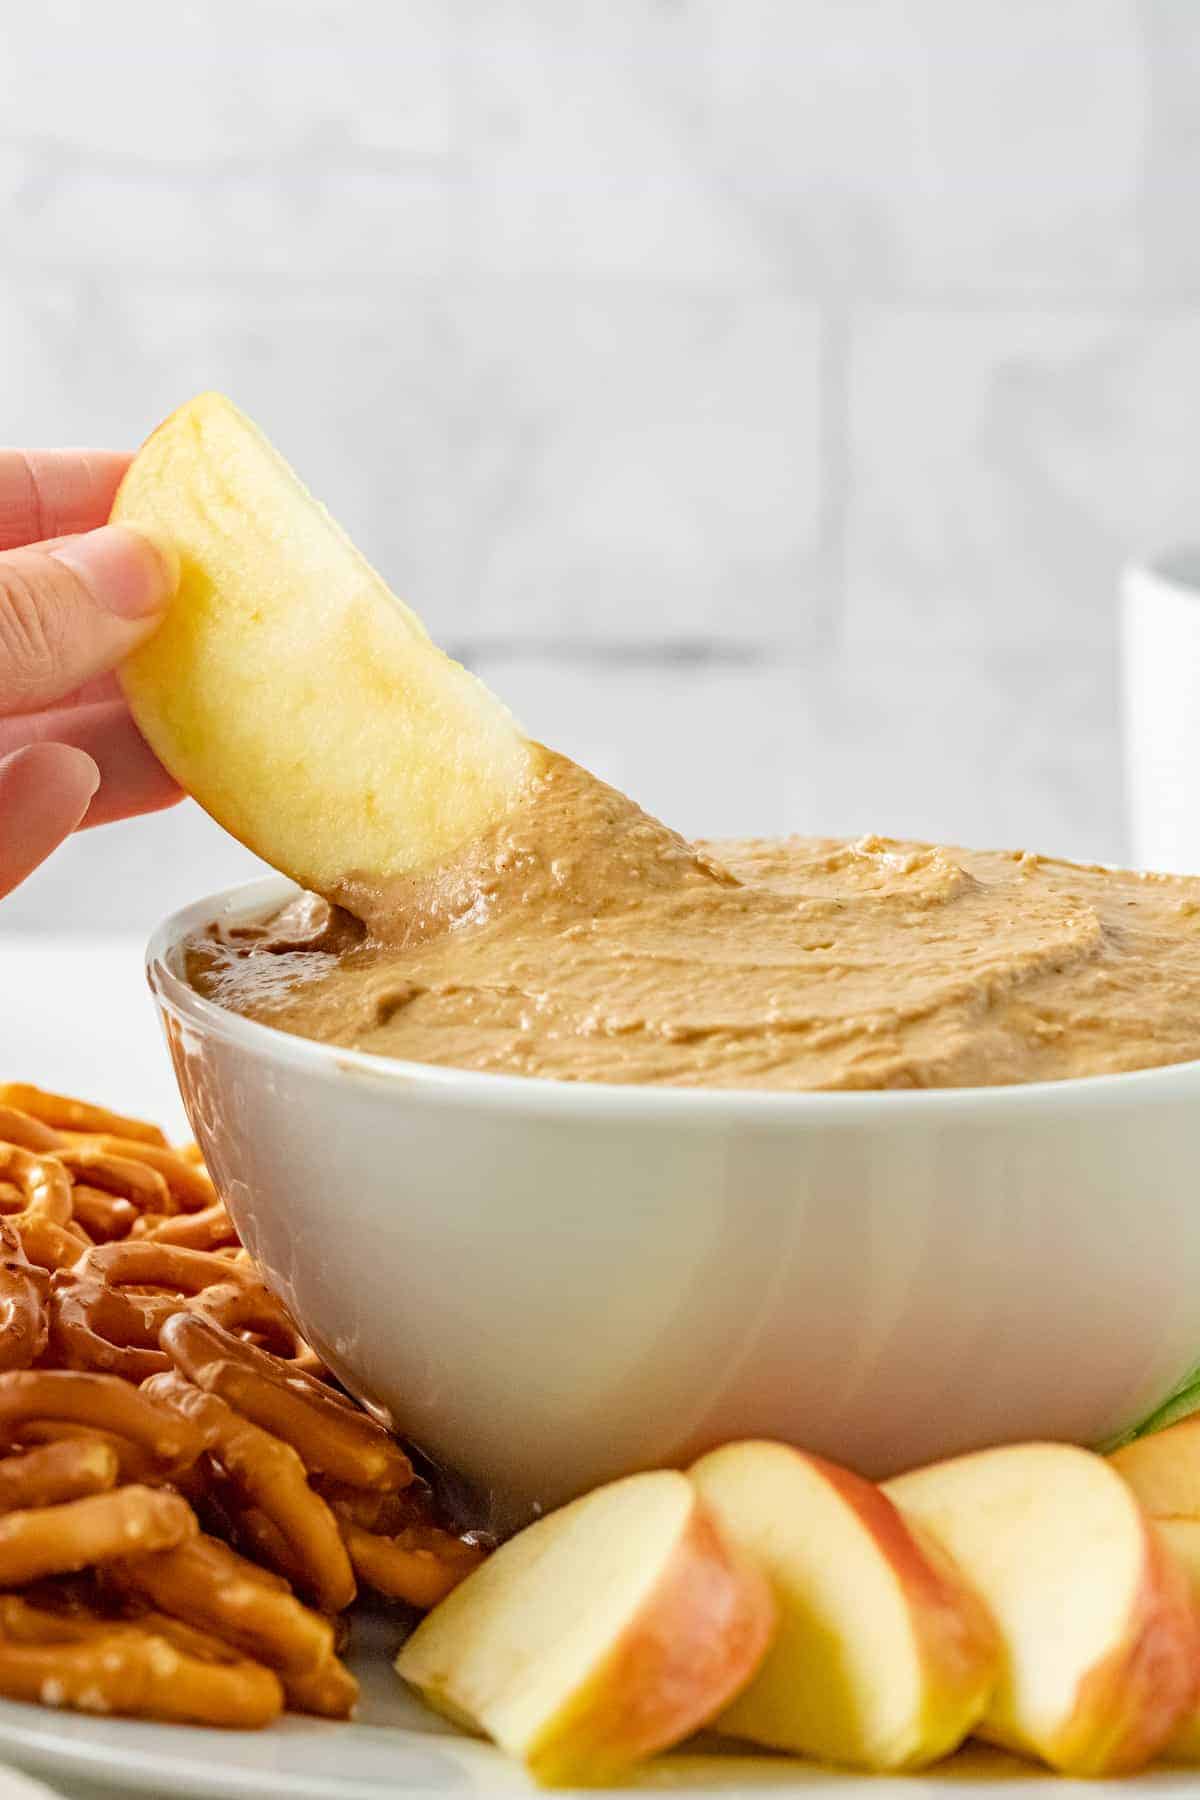 dipping an apple slice in to the gingerbread hummus on the platter